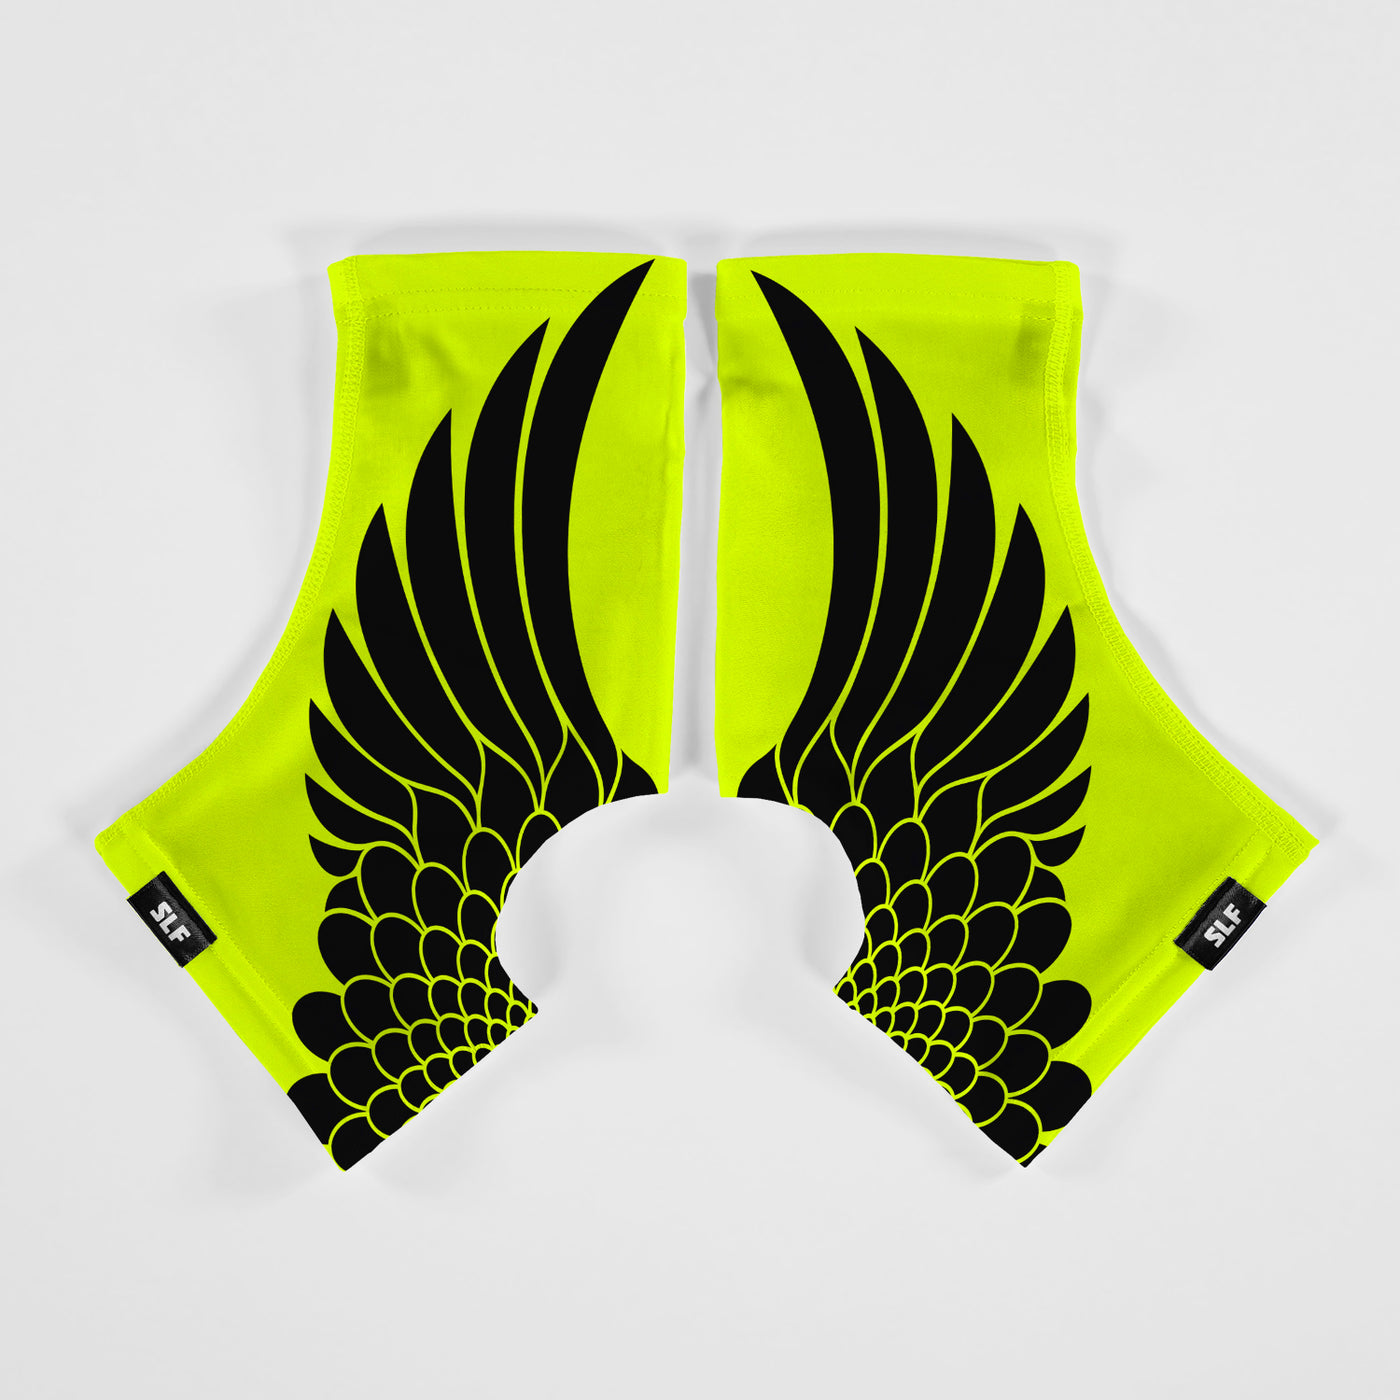 Icarus Safety Yellow Spats / Cleat Covers